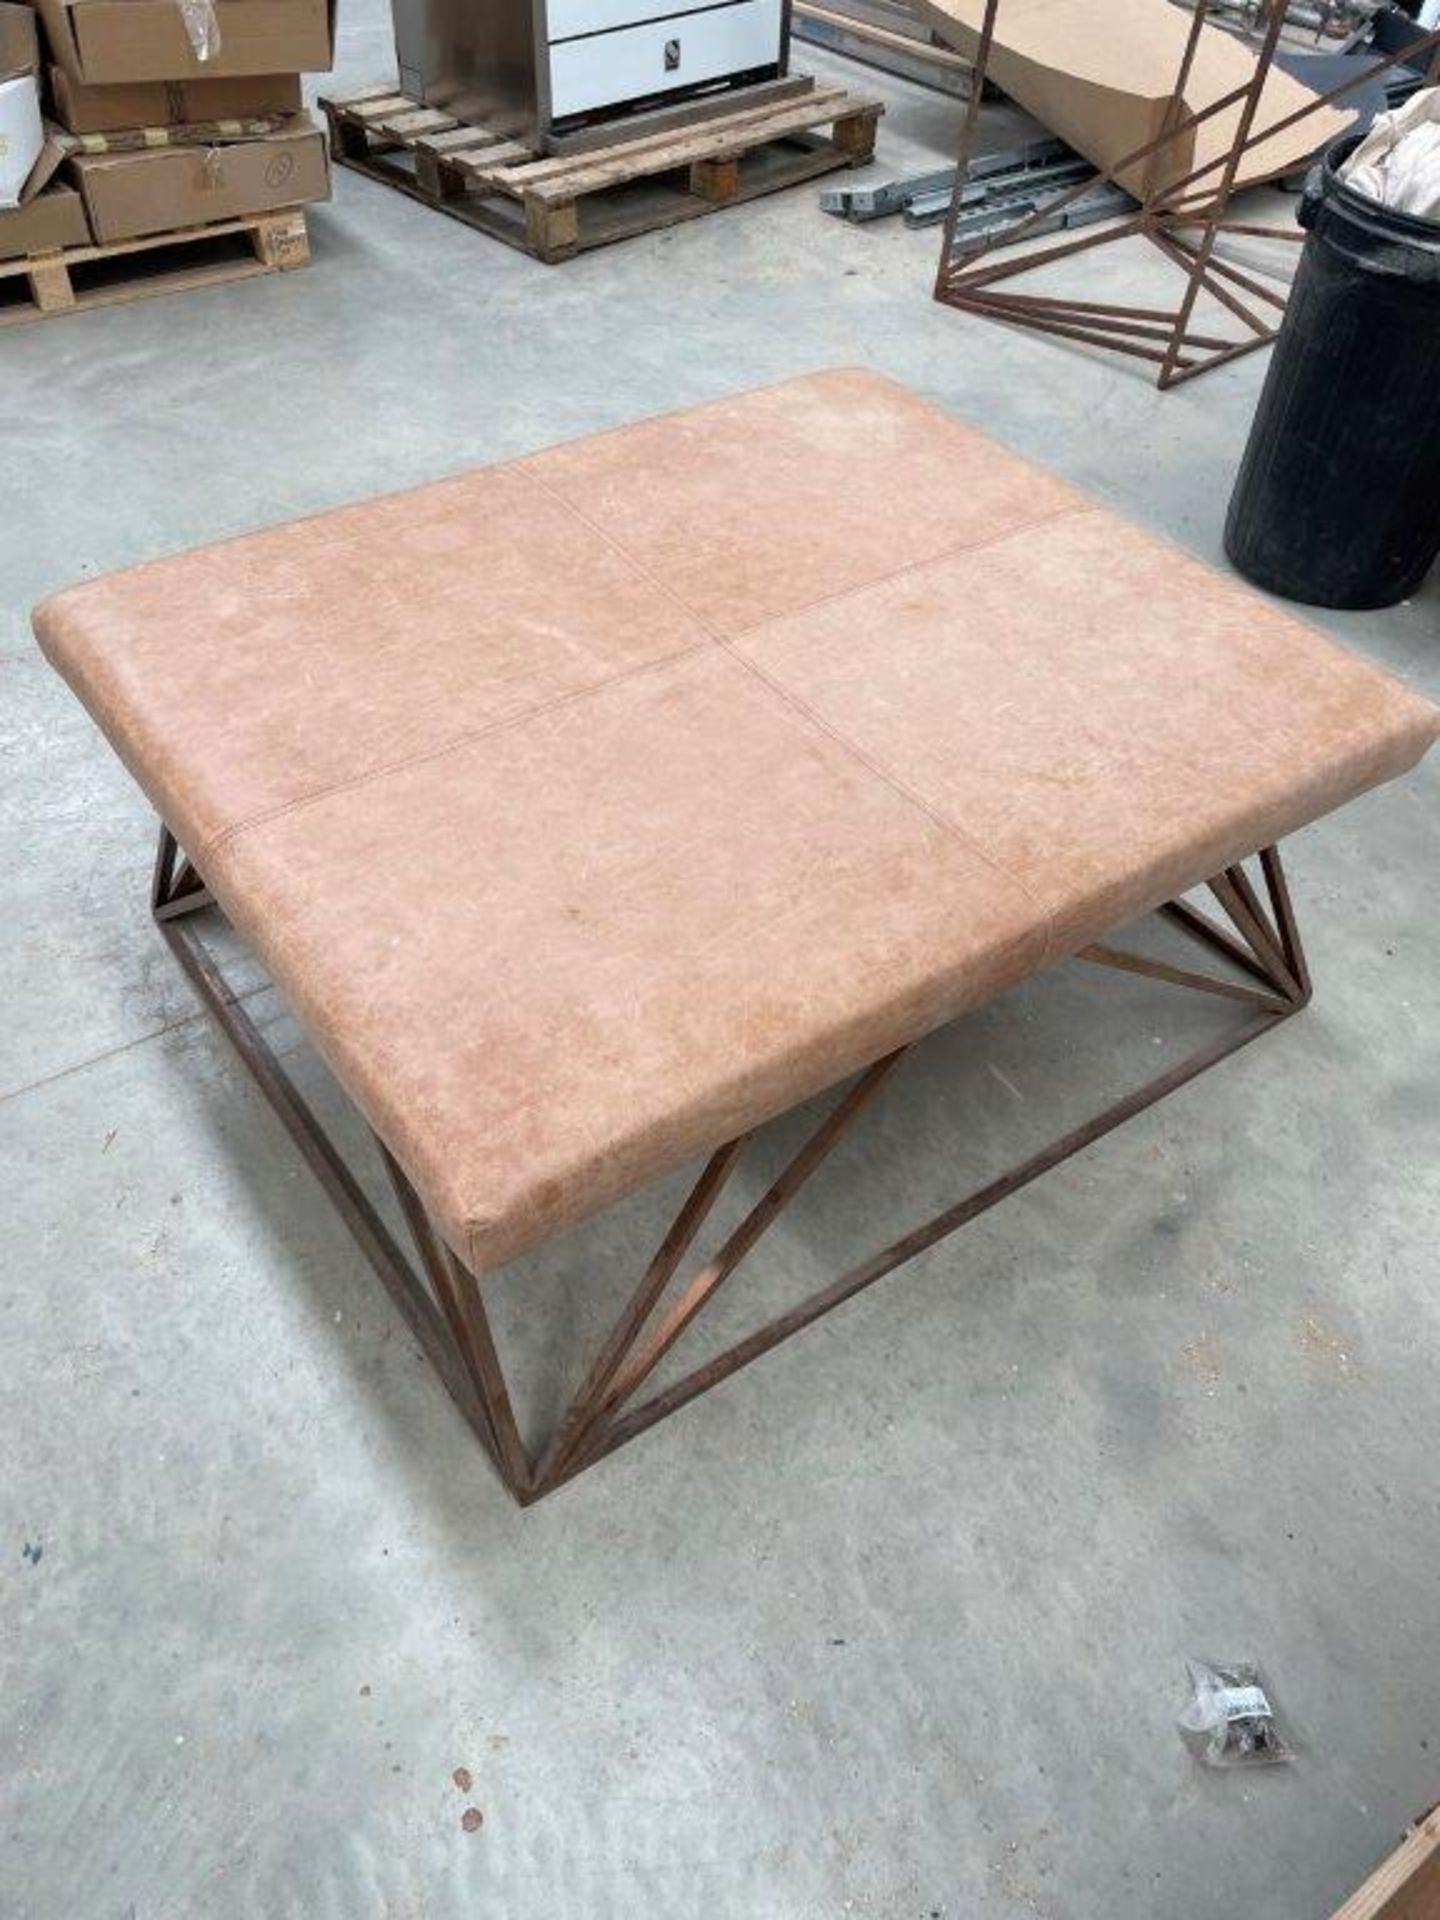 Steel framed copper effect seating 1200 x 1000 x 500mm high